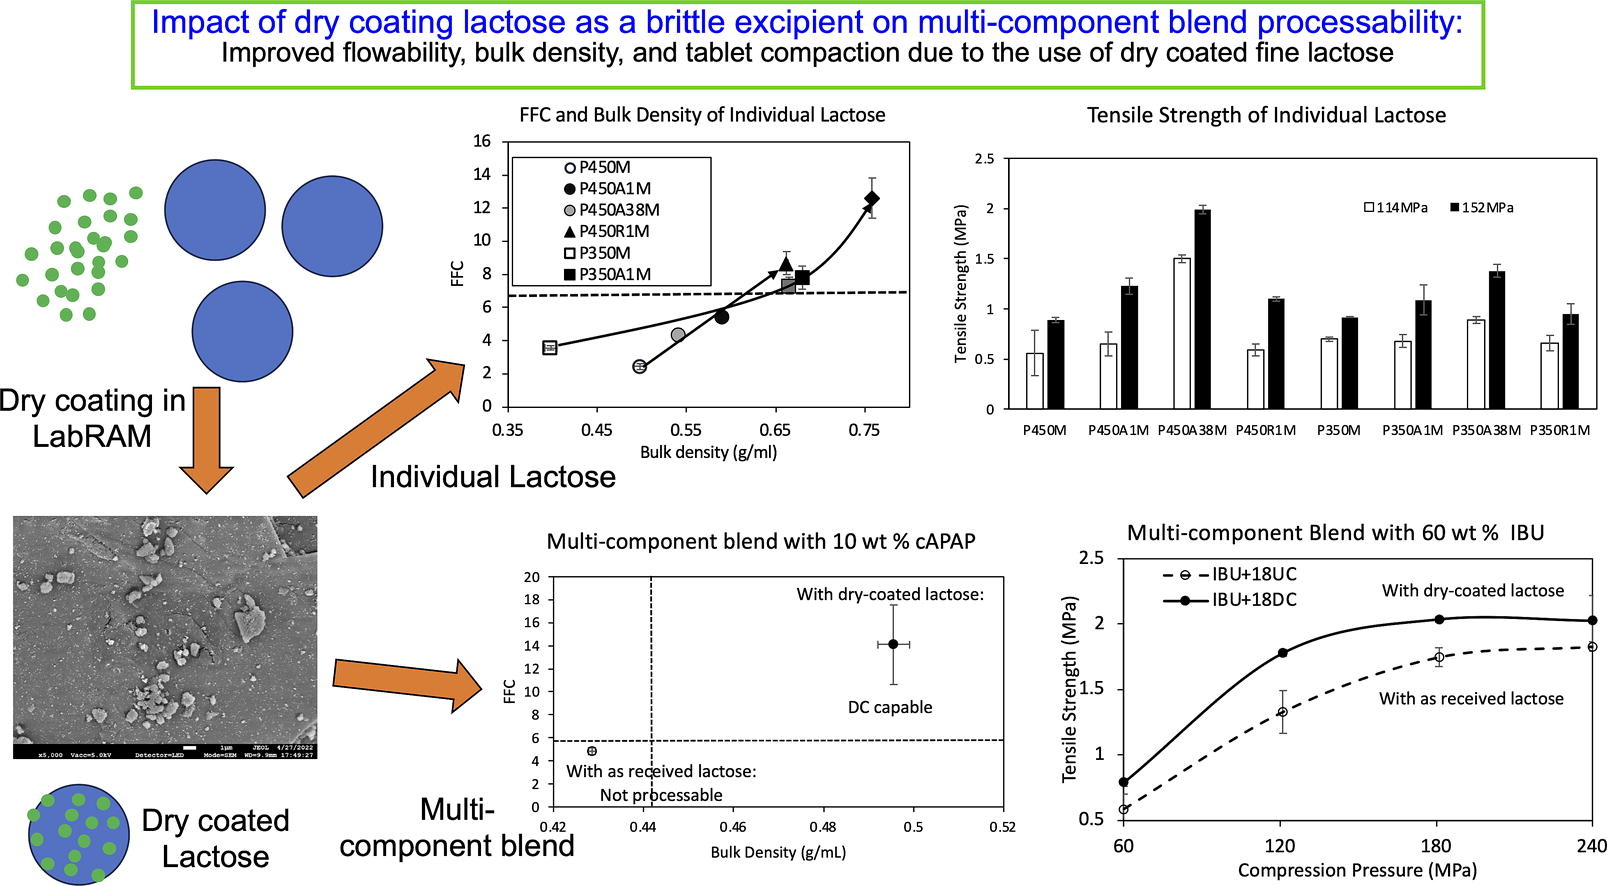 Impact of dry coating lactose as a brittle excipient on multi-component blend processability